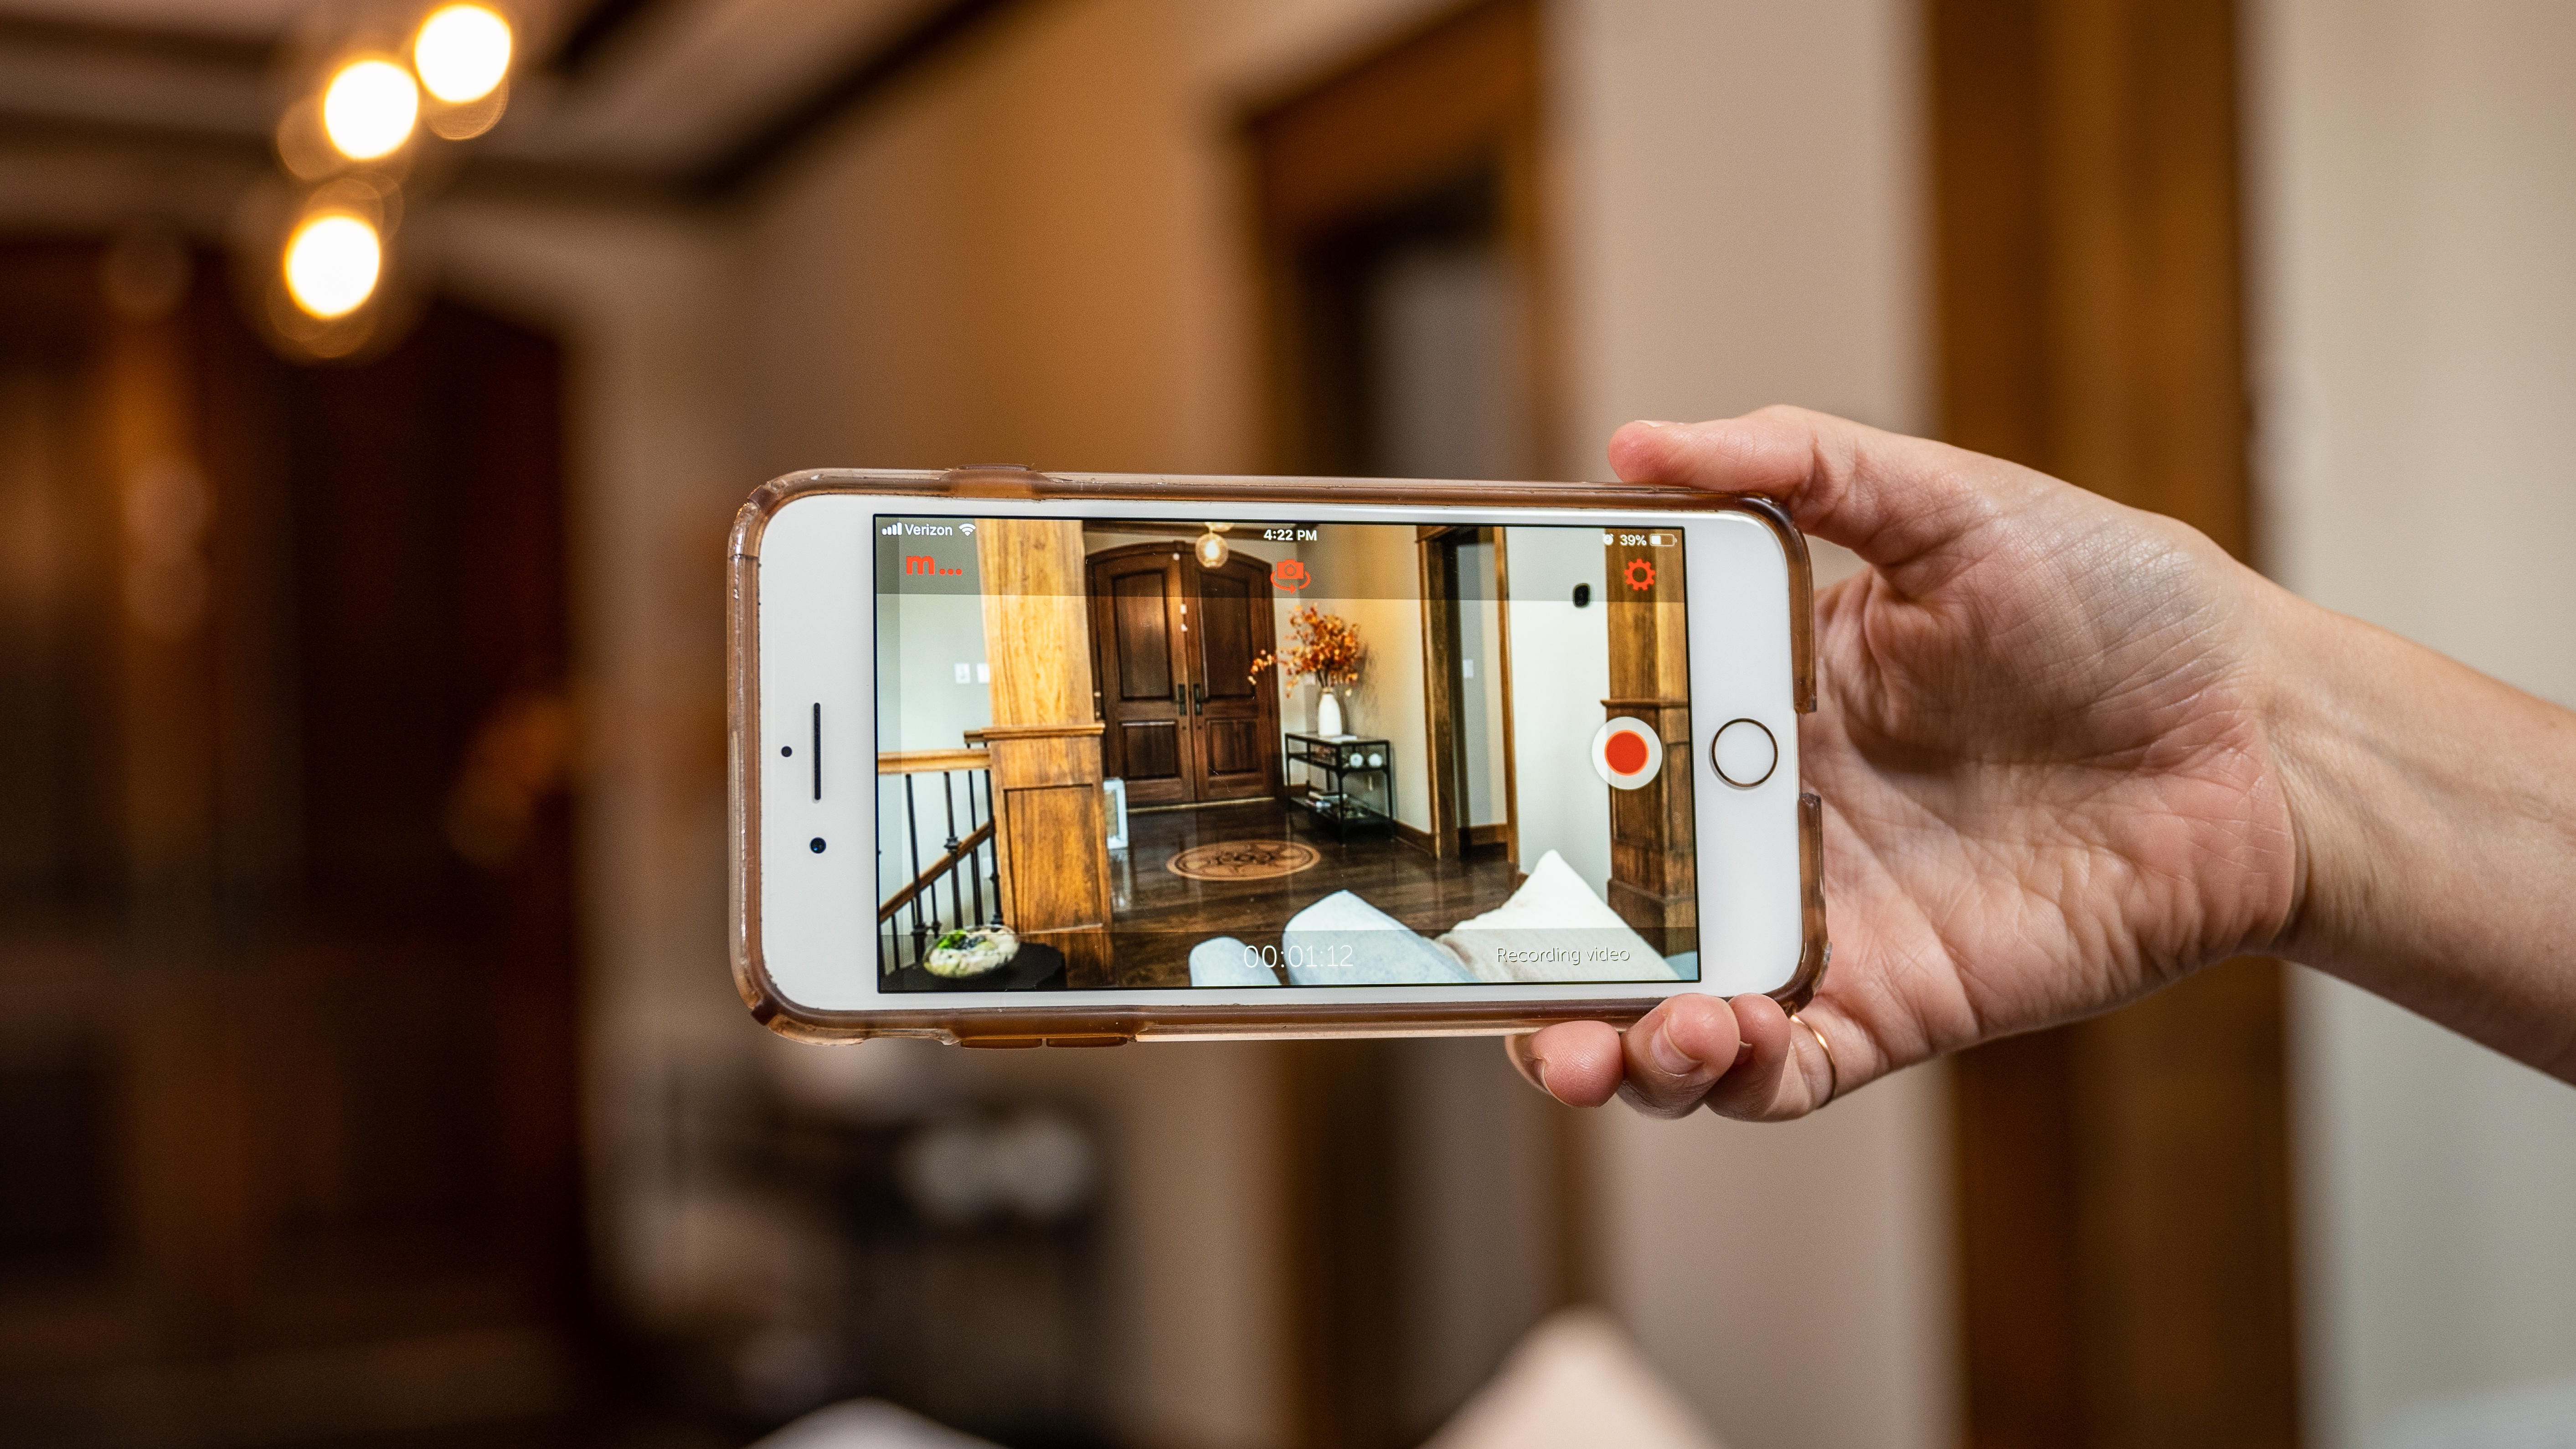 Diy Home Security Camera All You Need Is One Of The Old Phones You Have In A Drawer Cnet